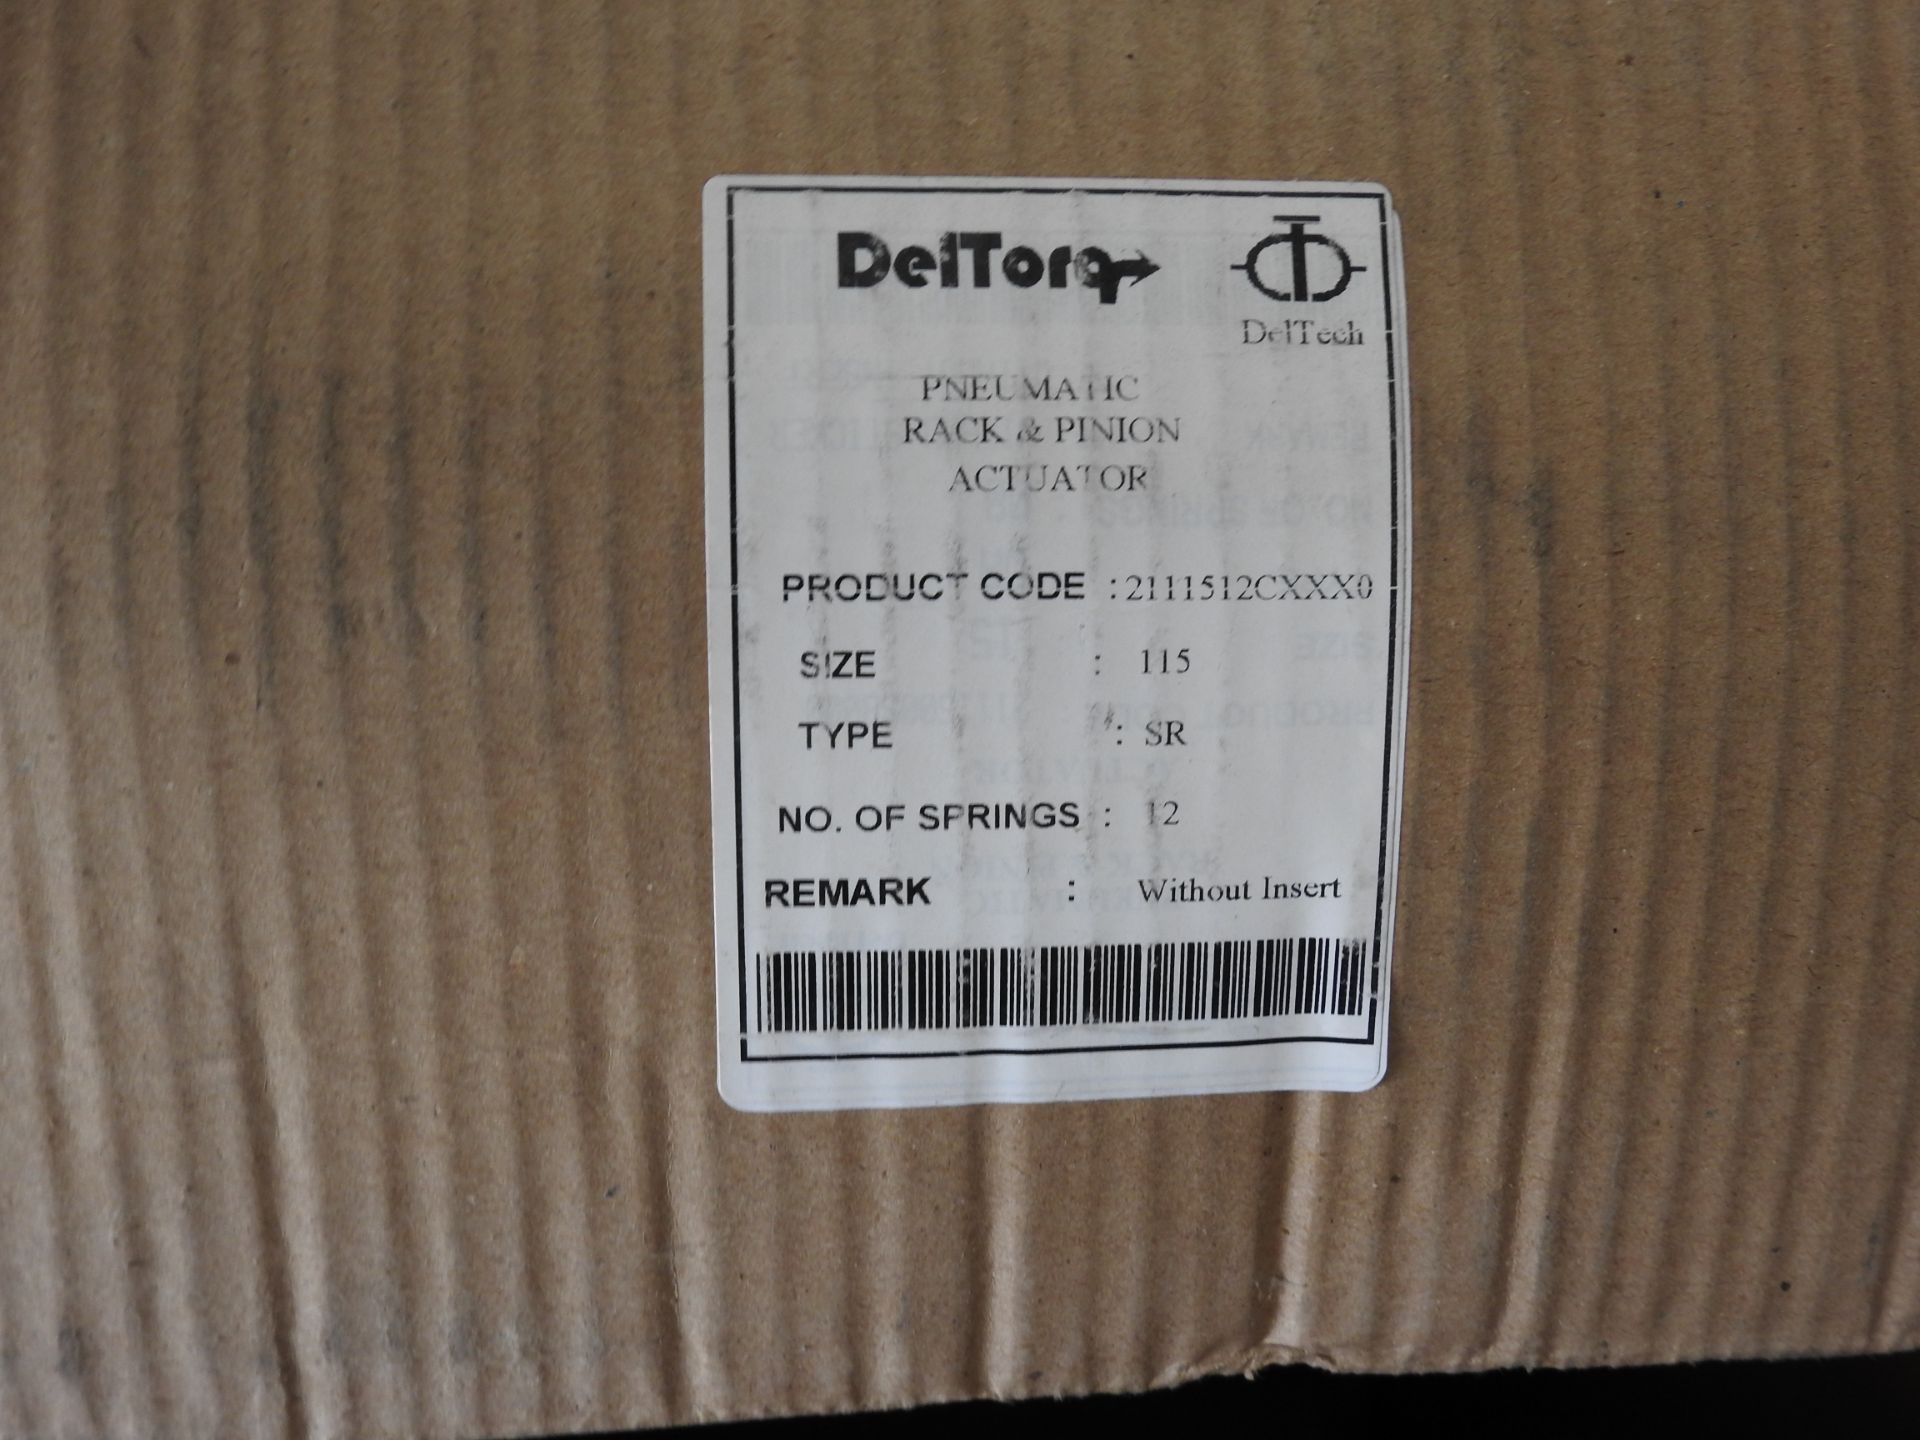 Lot of Pneumatic Valve Actuators, DelTorq, Mdl. 211512CB000 ** Located: 4402 Theiss Rd, Houston, - Image 7 of 10